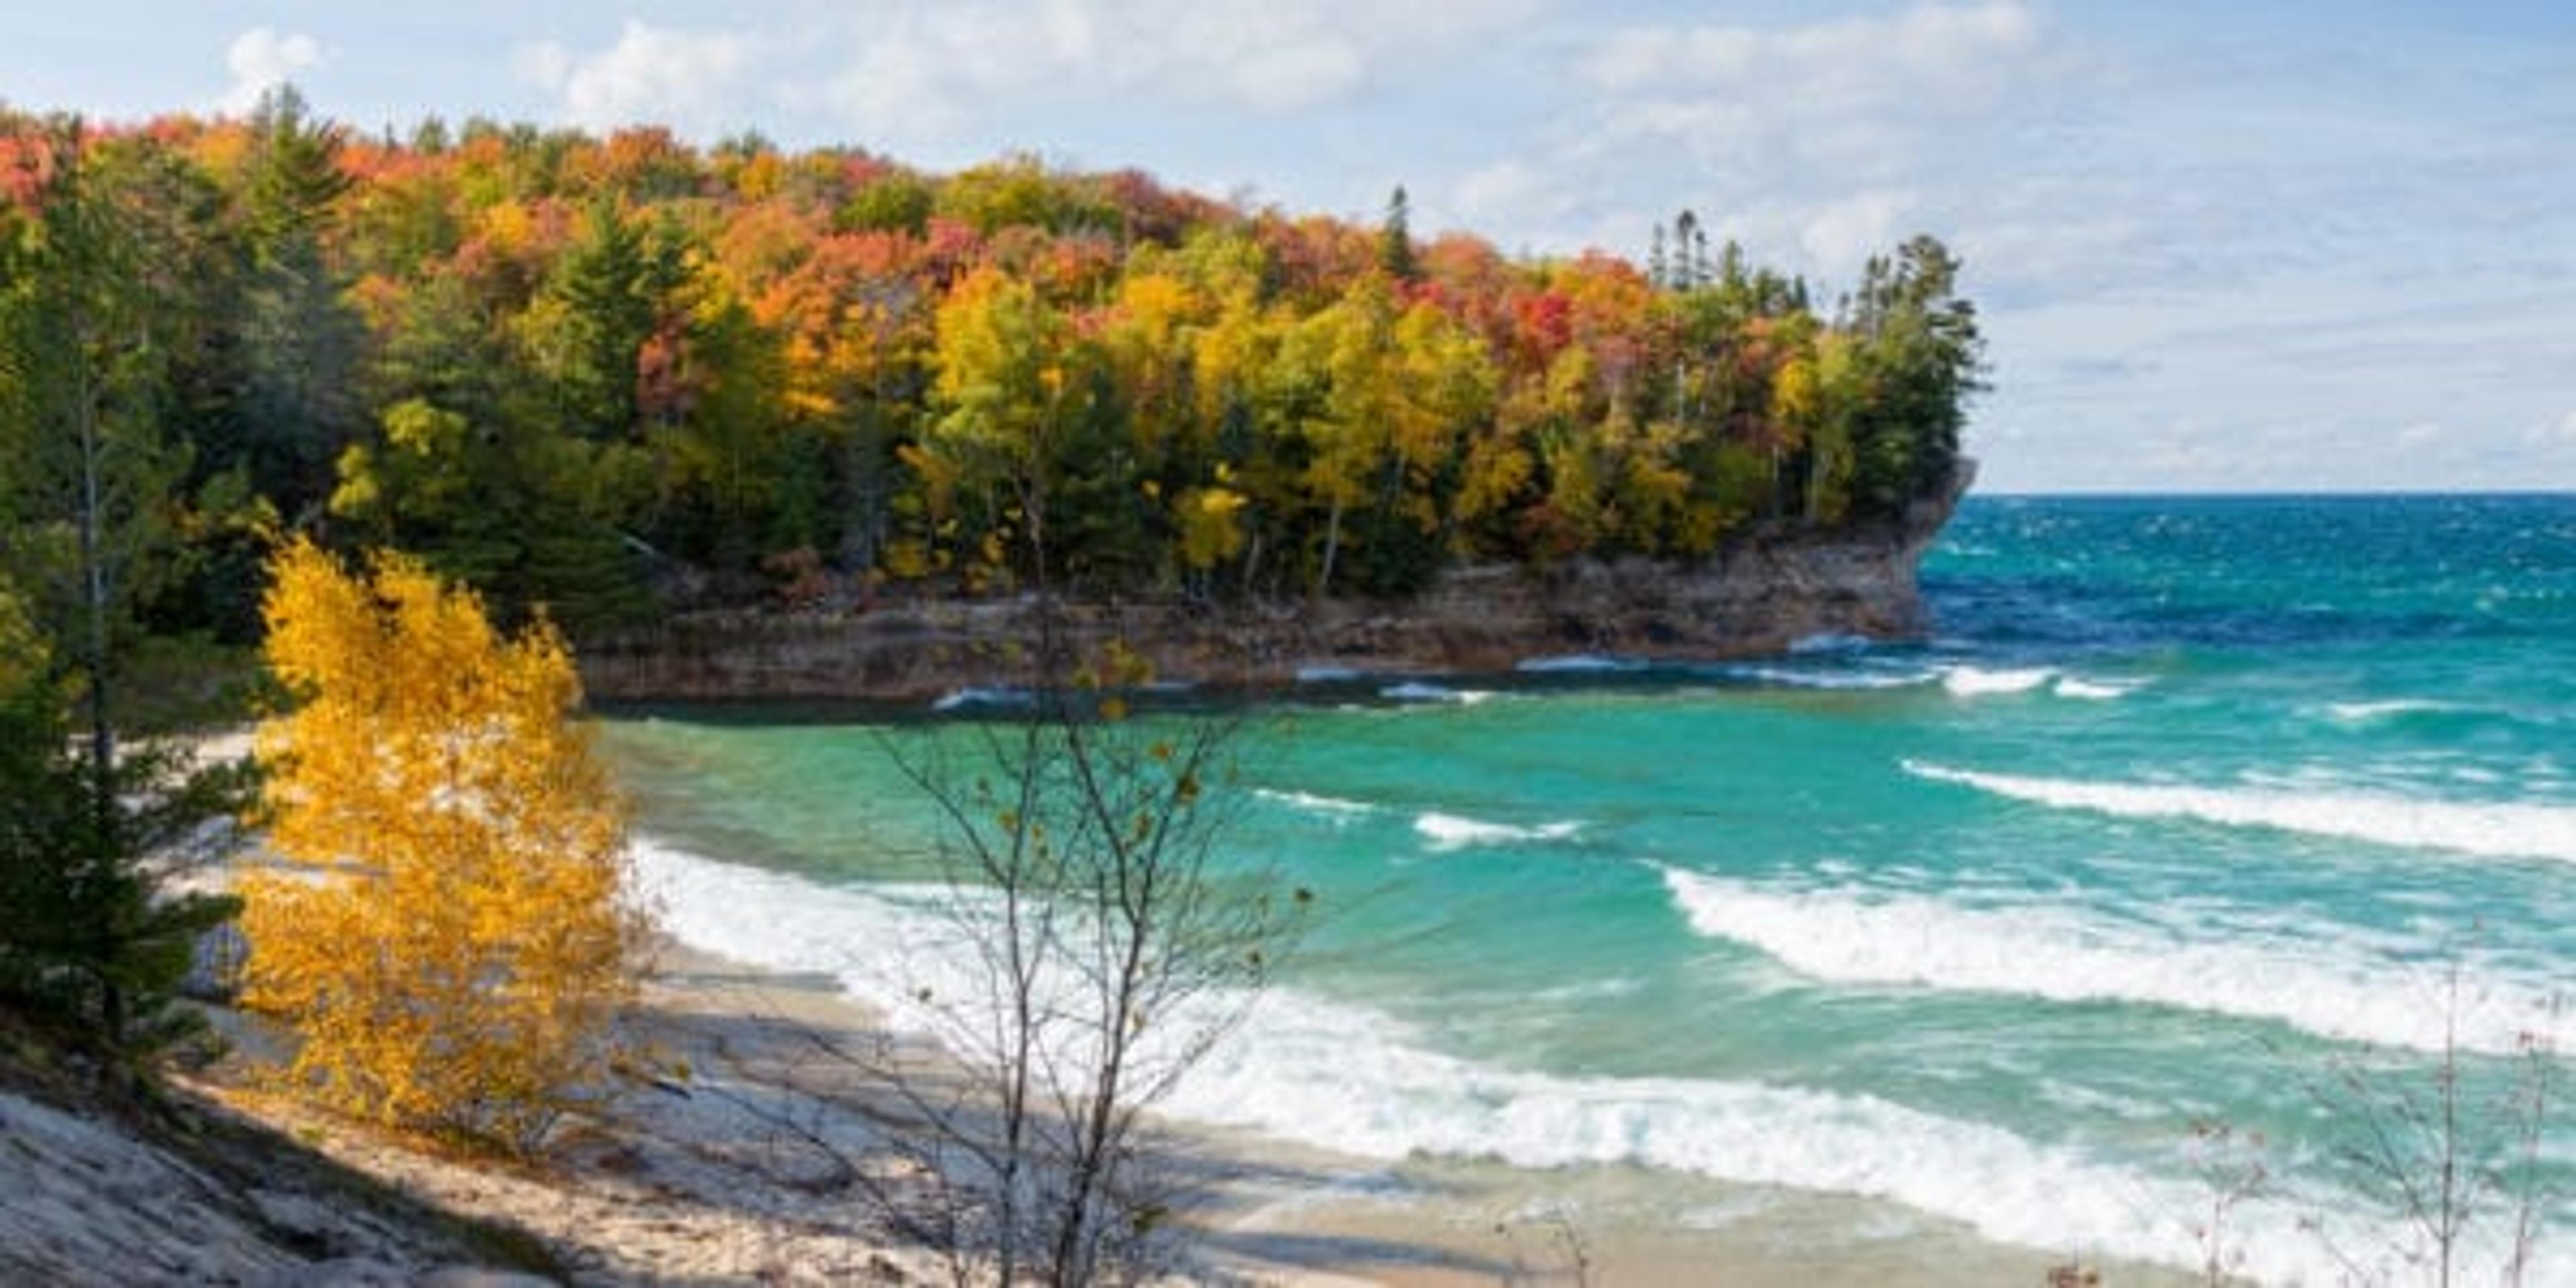 Lake Superior Chapel Beach in Autumn at Pictured Rocks